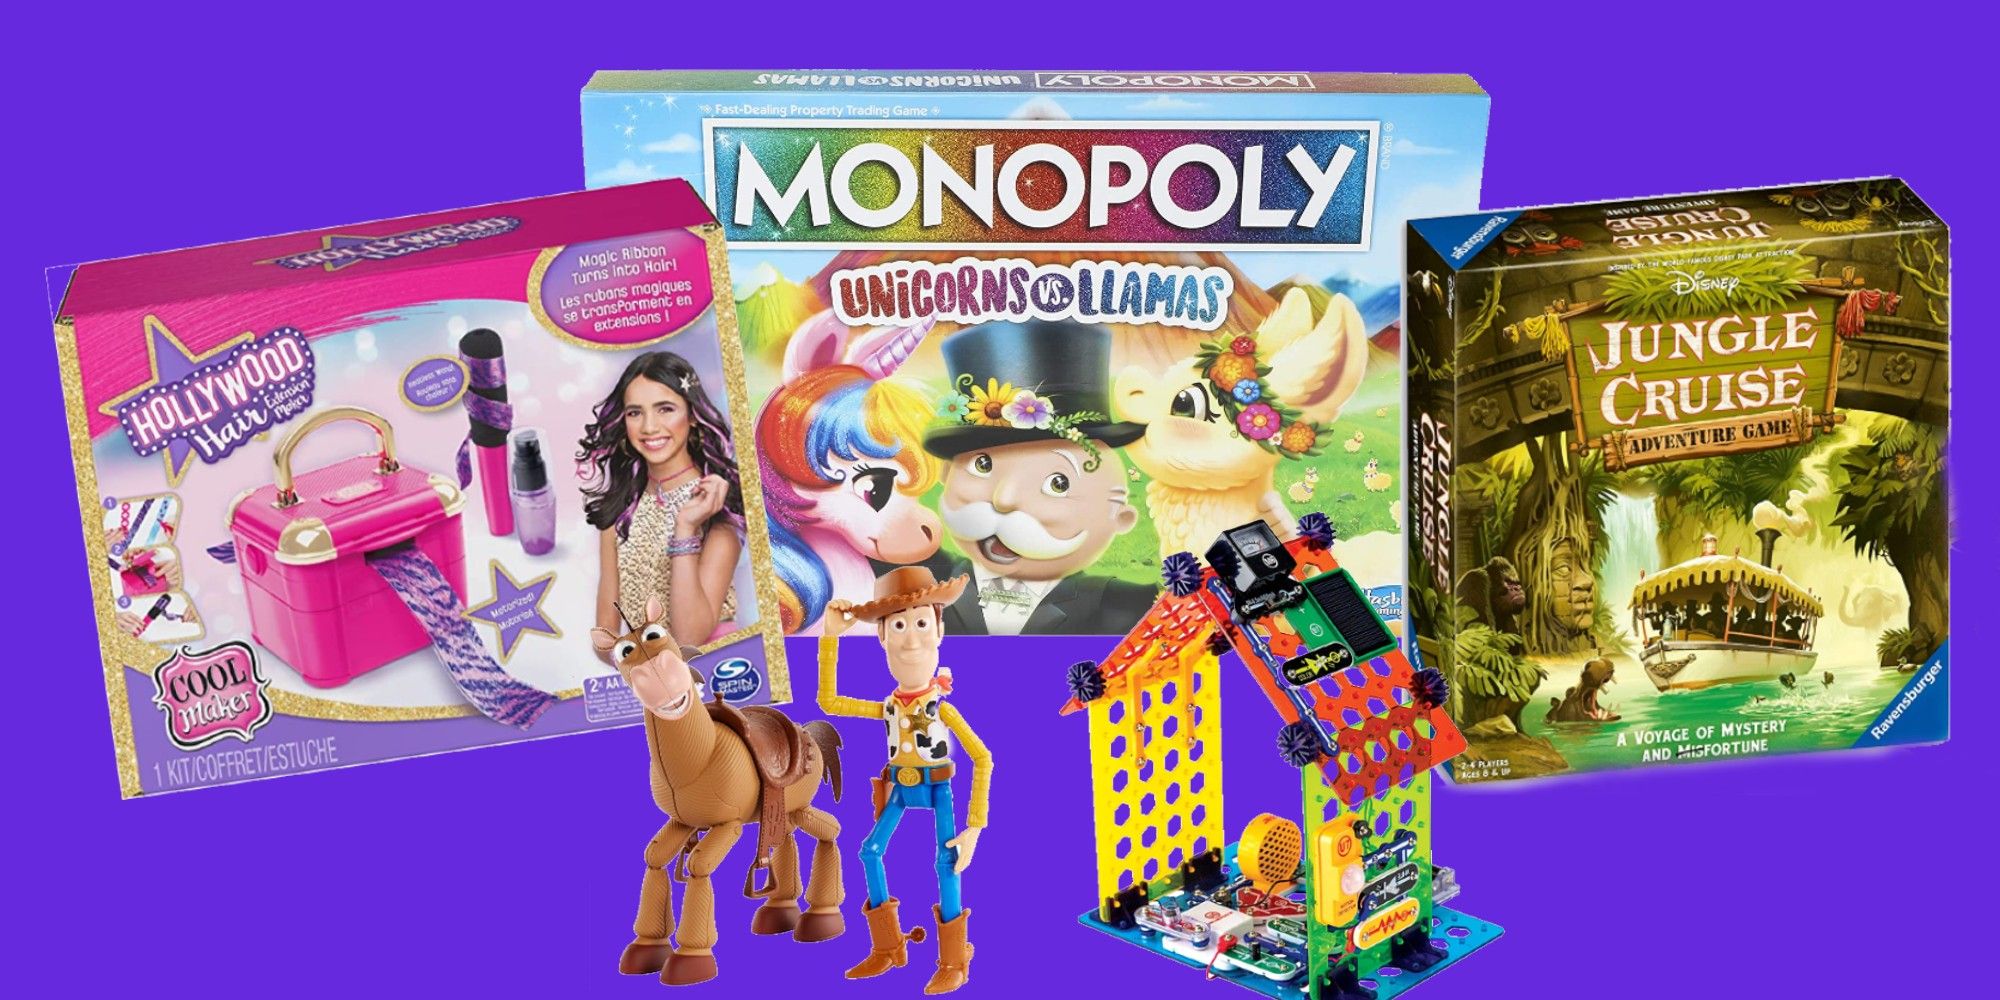 Image of Hollywood Hair Extensions, Monopoly, Jungle Cruise Board Game, Bullseye and Woody, and Snap Circuits, all from Amazon Exclusive Toys